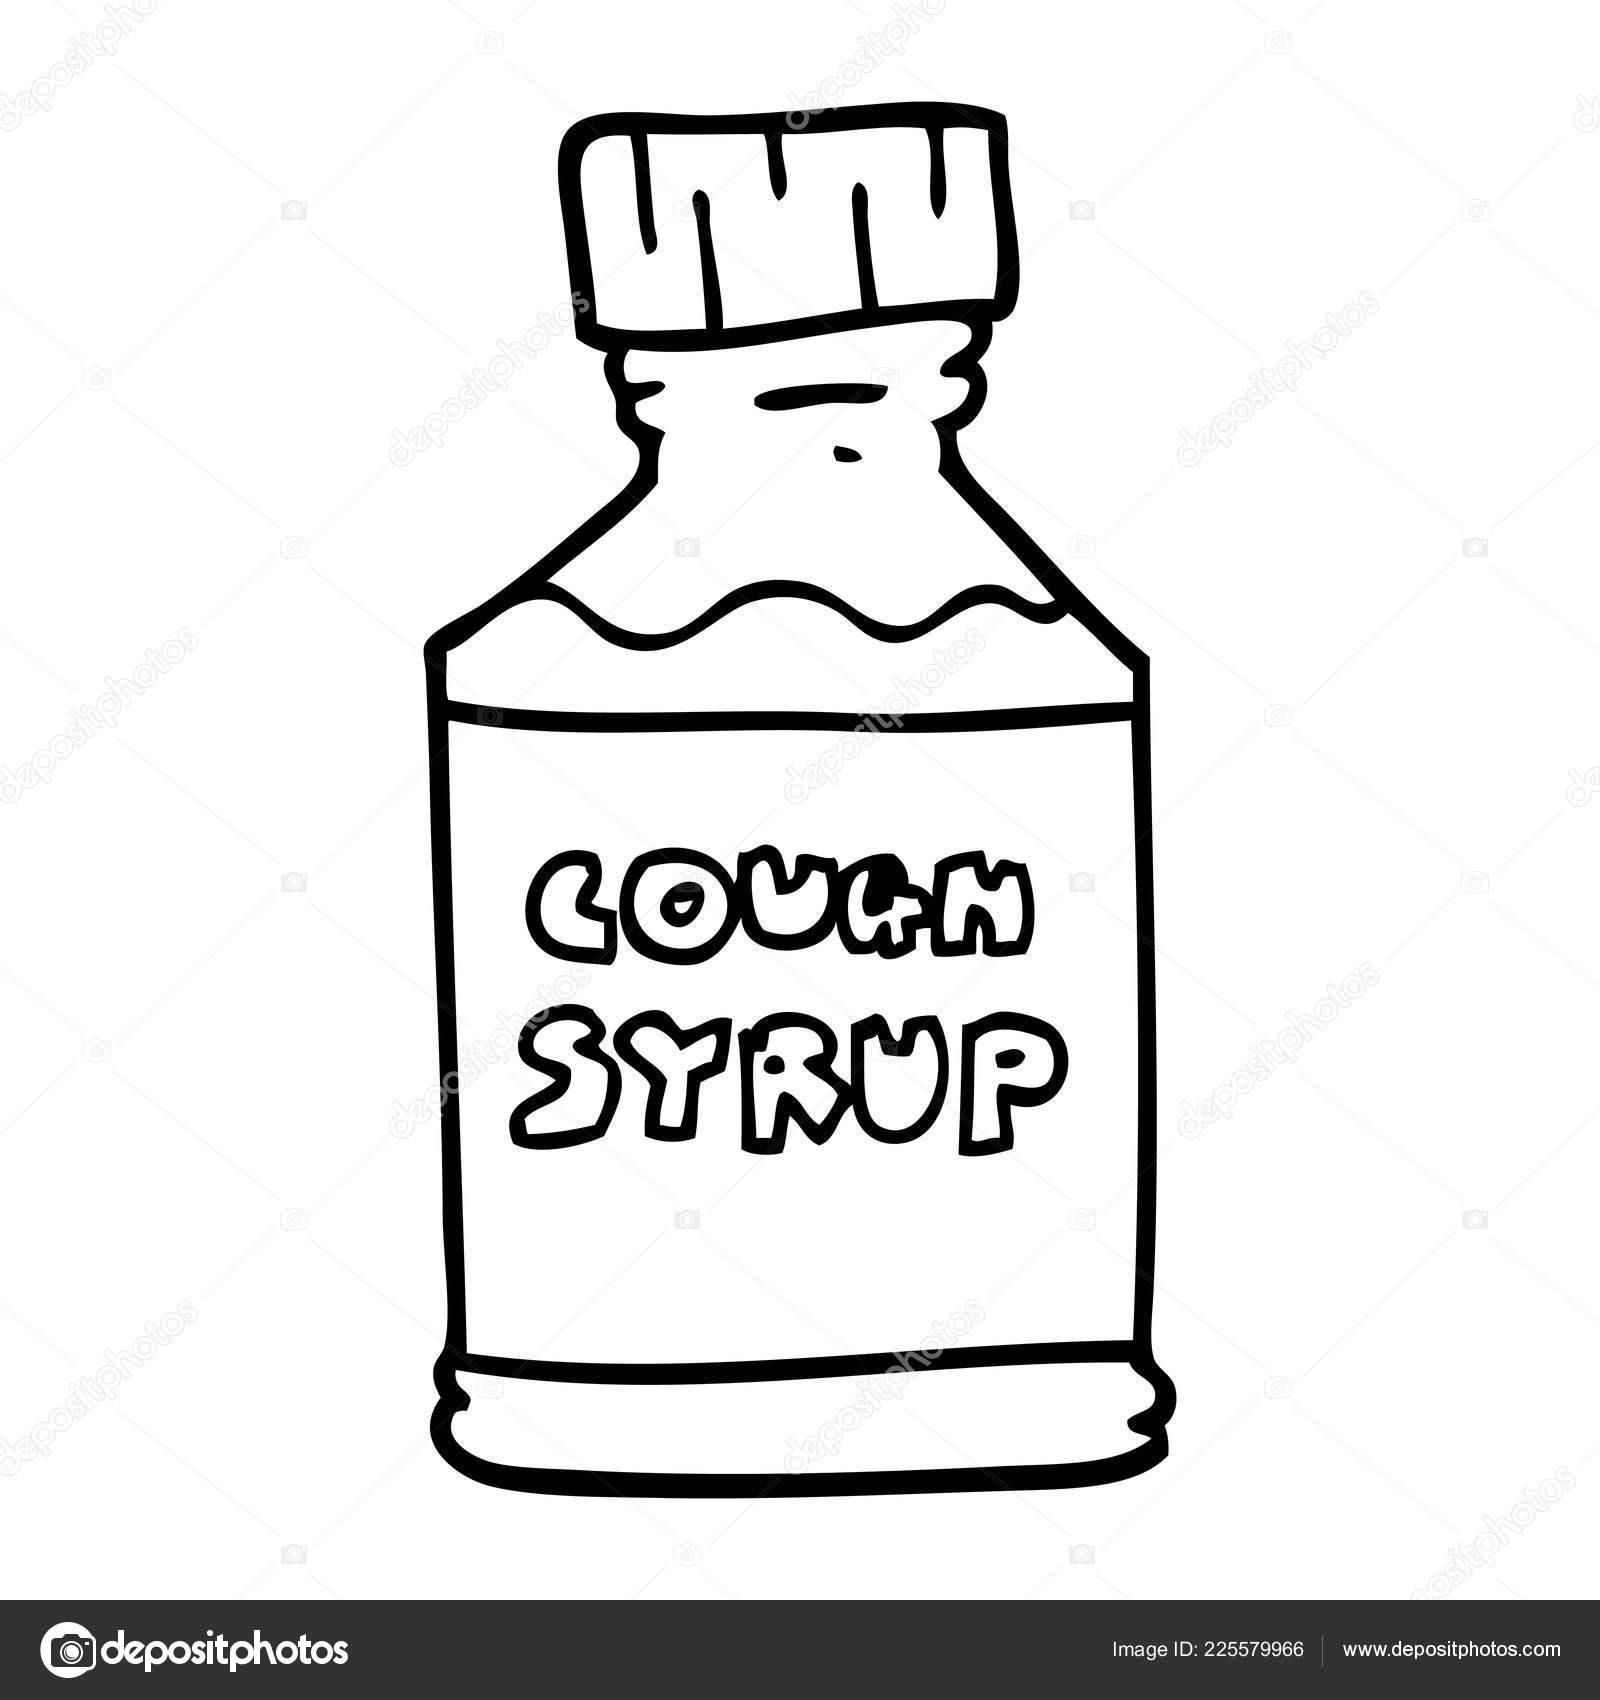 Borgore syrup byyegman free porn images